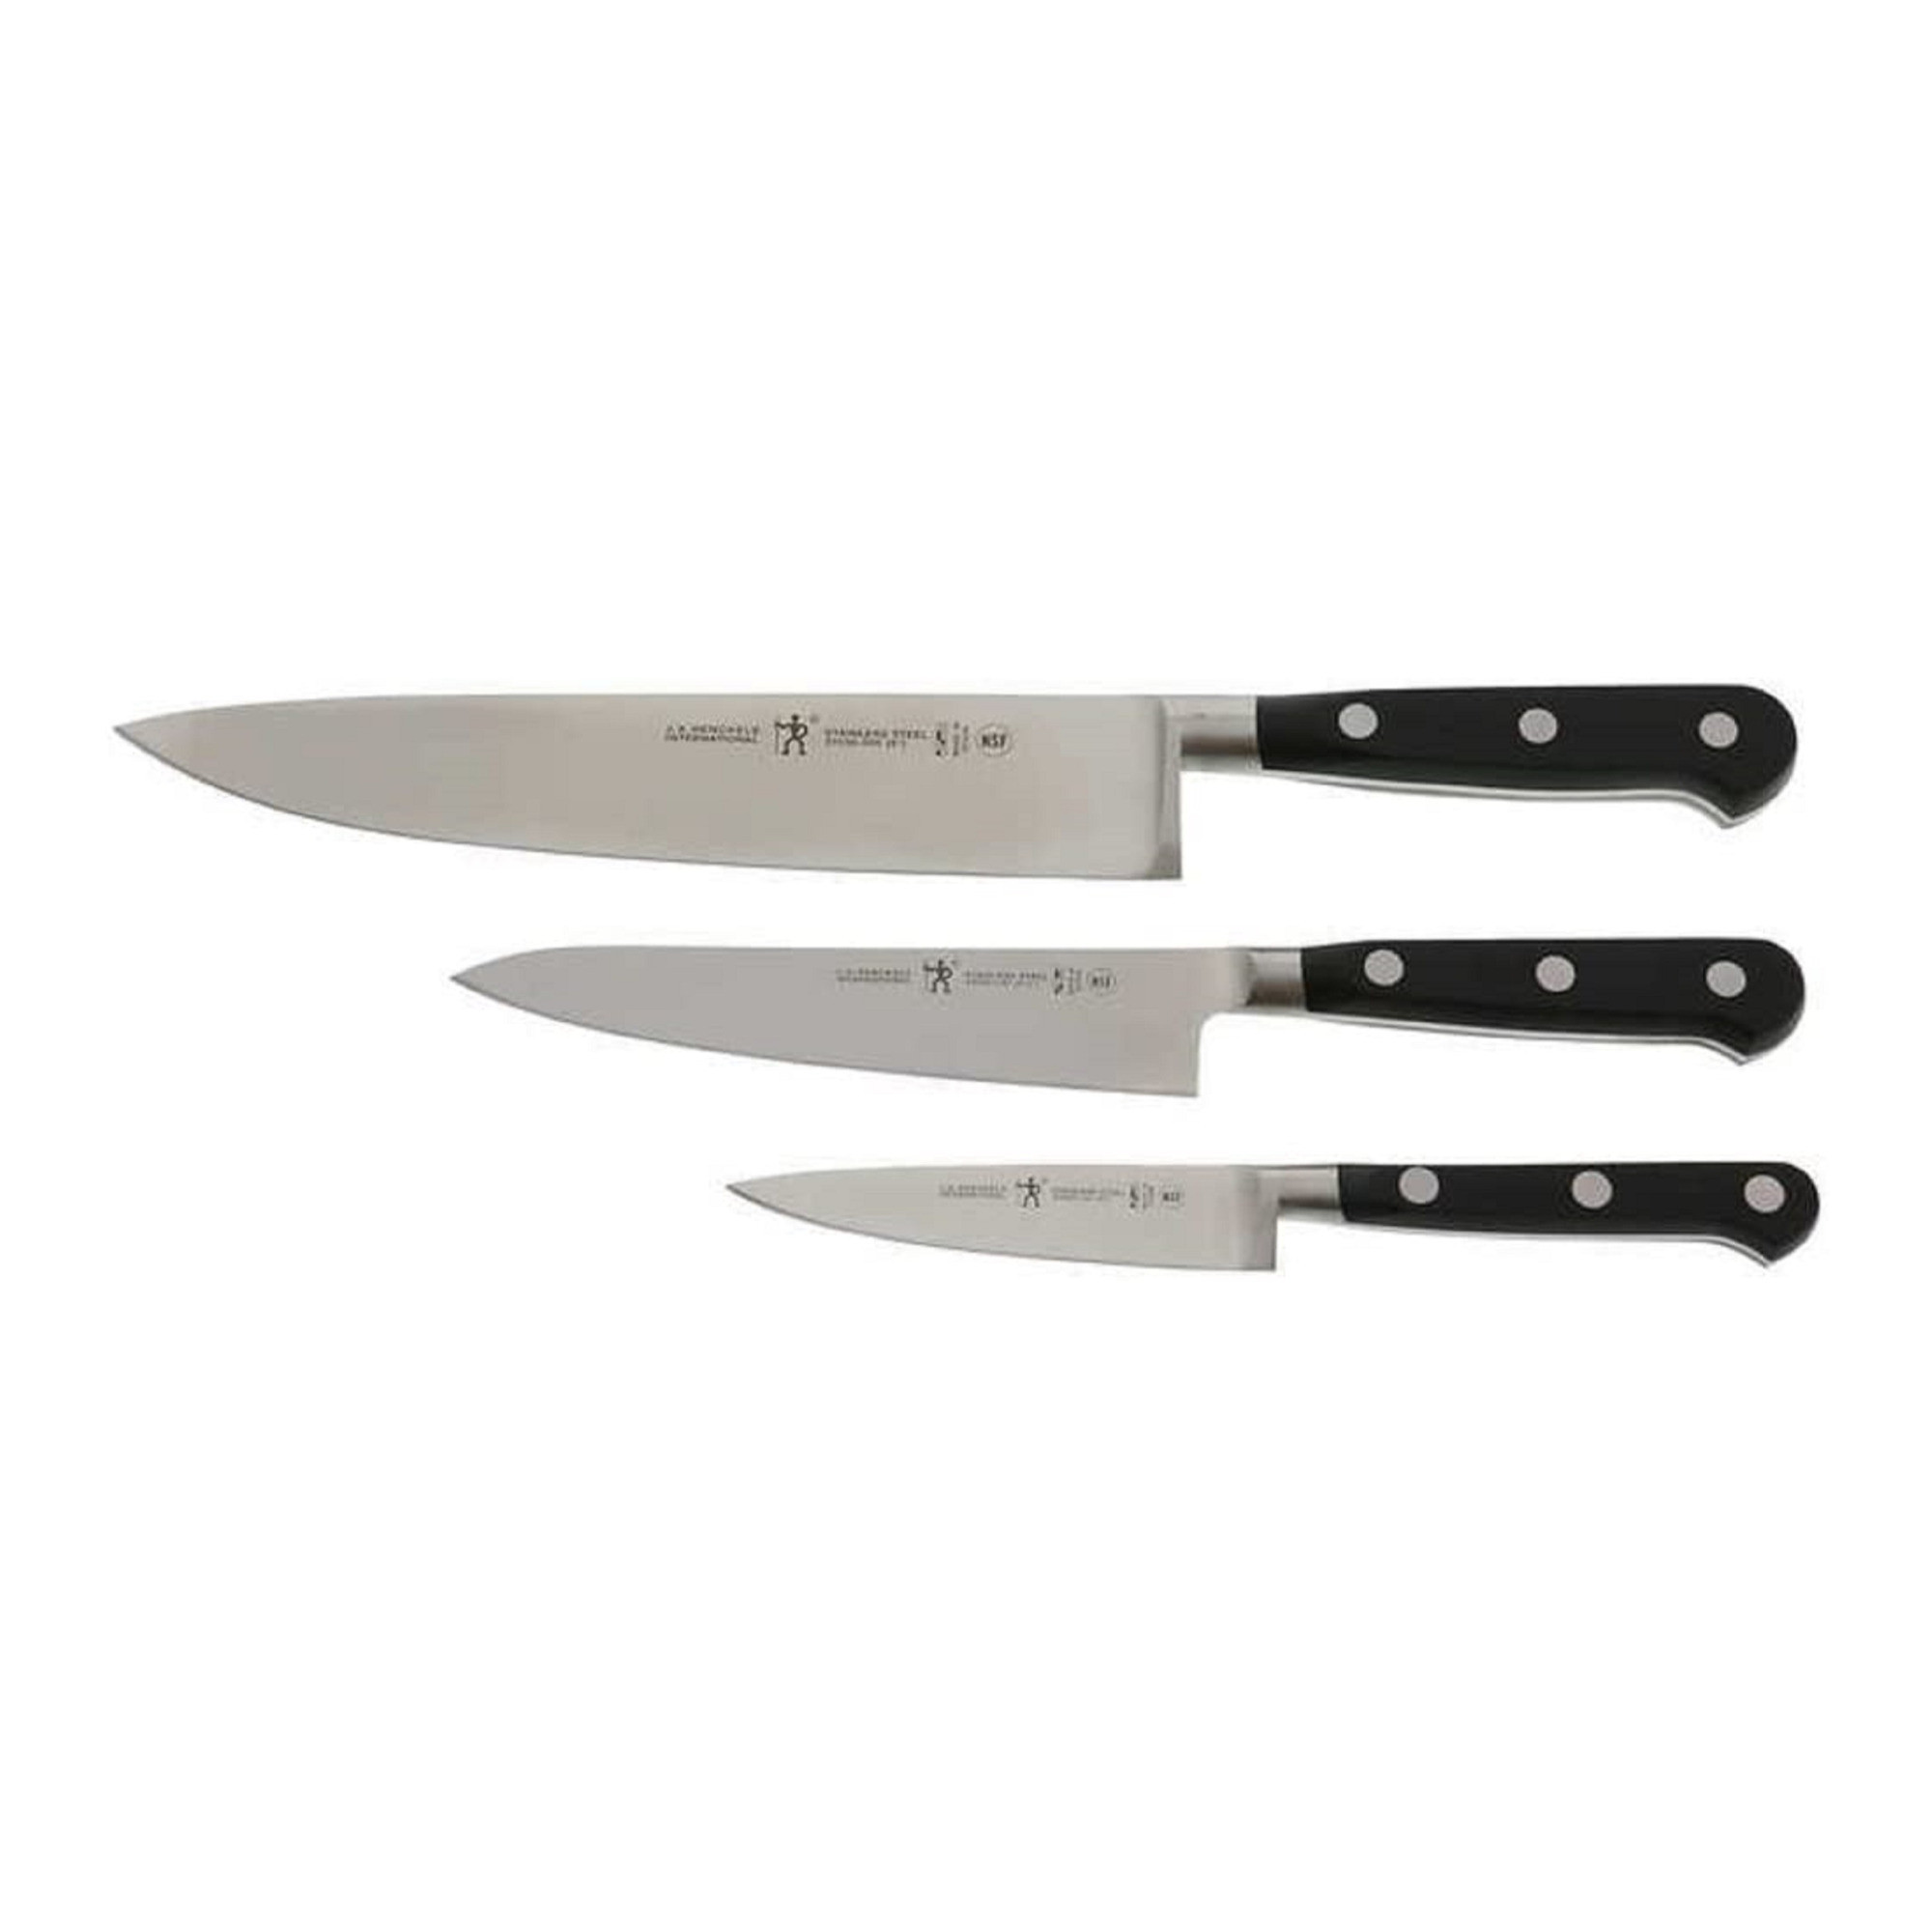 Zwilling J.A Henckels Couteau 3-Piece Forged Set: (8" chefs, 6" utility, & 4" paring)  $60 + free s/h at Focus Camera (less w/ SD Cashback)